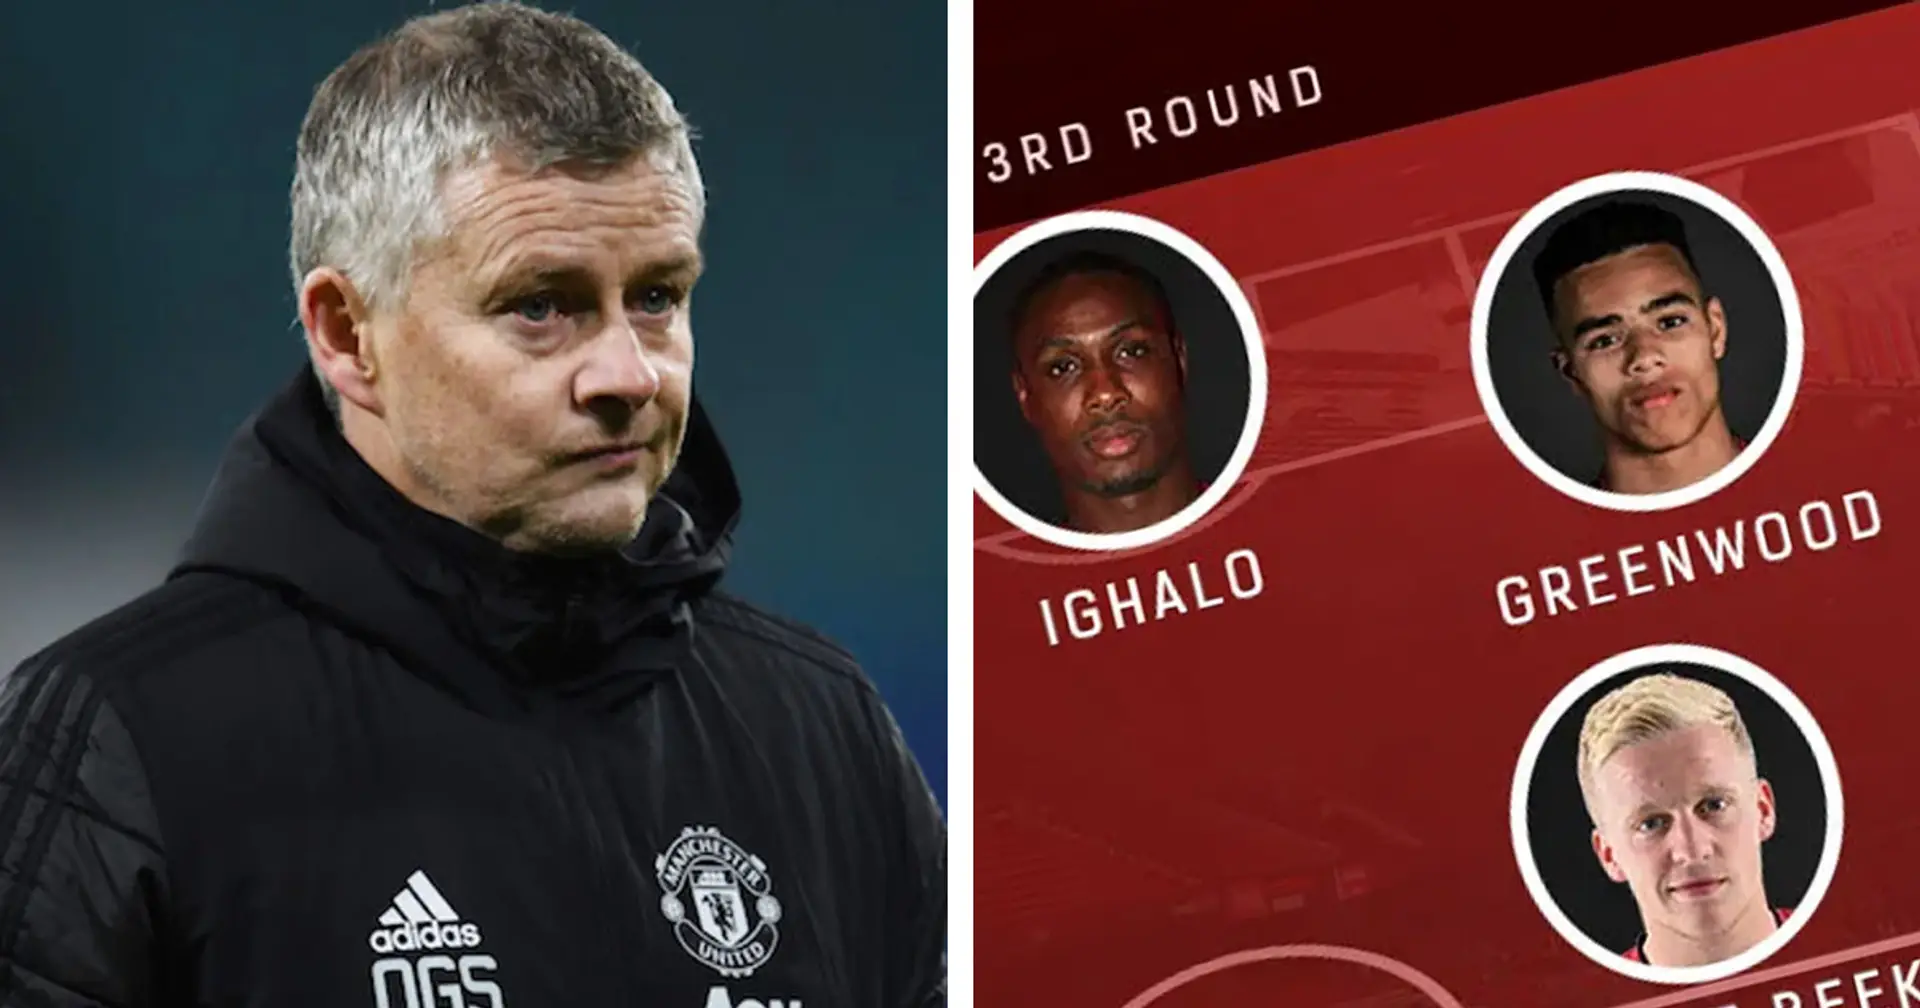 'Ighalo's experience should be exploited': United fans select ultimate XI for Watford clash